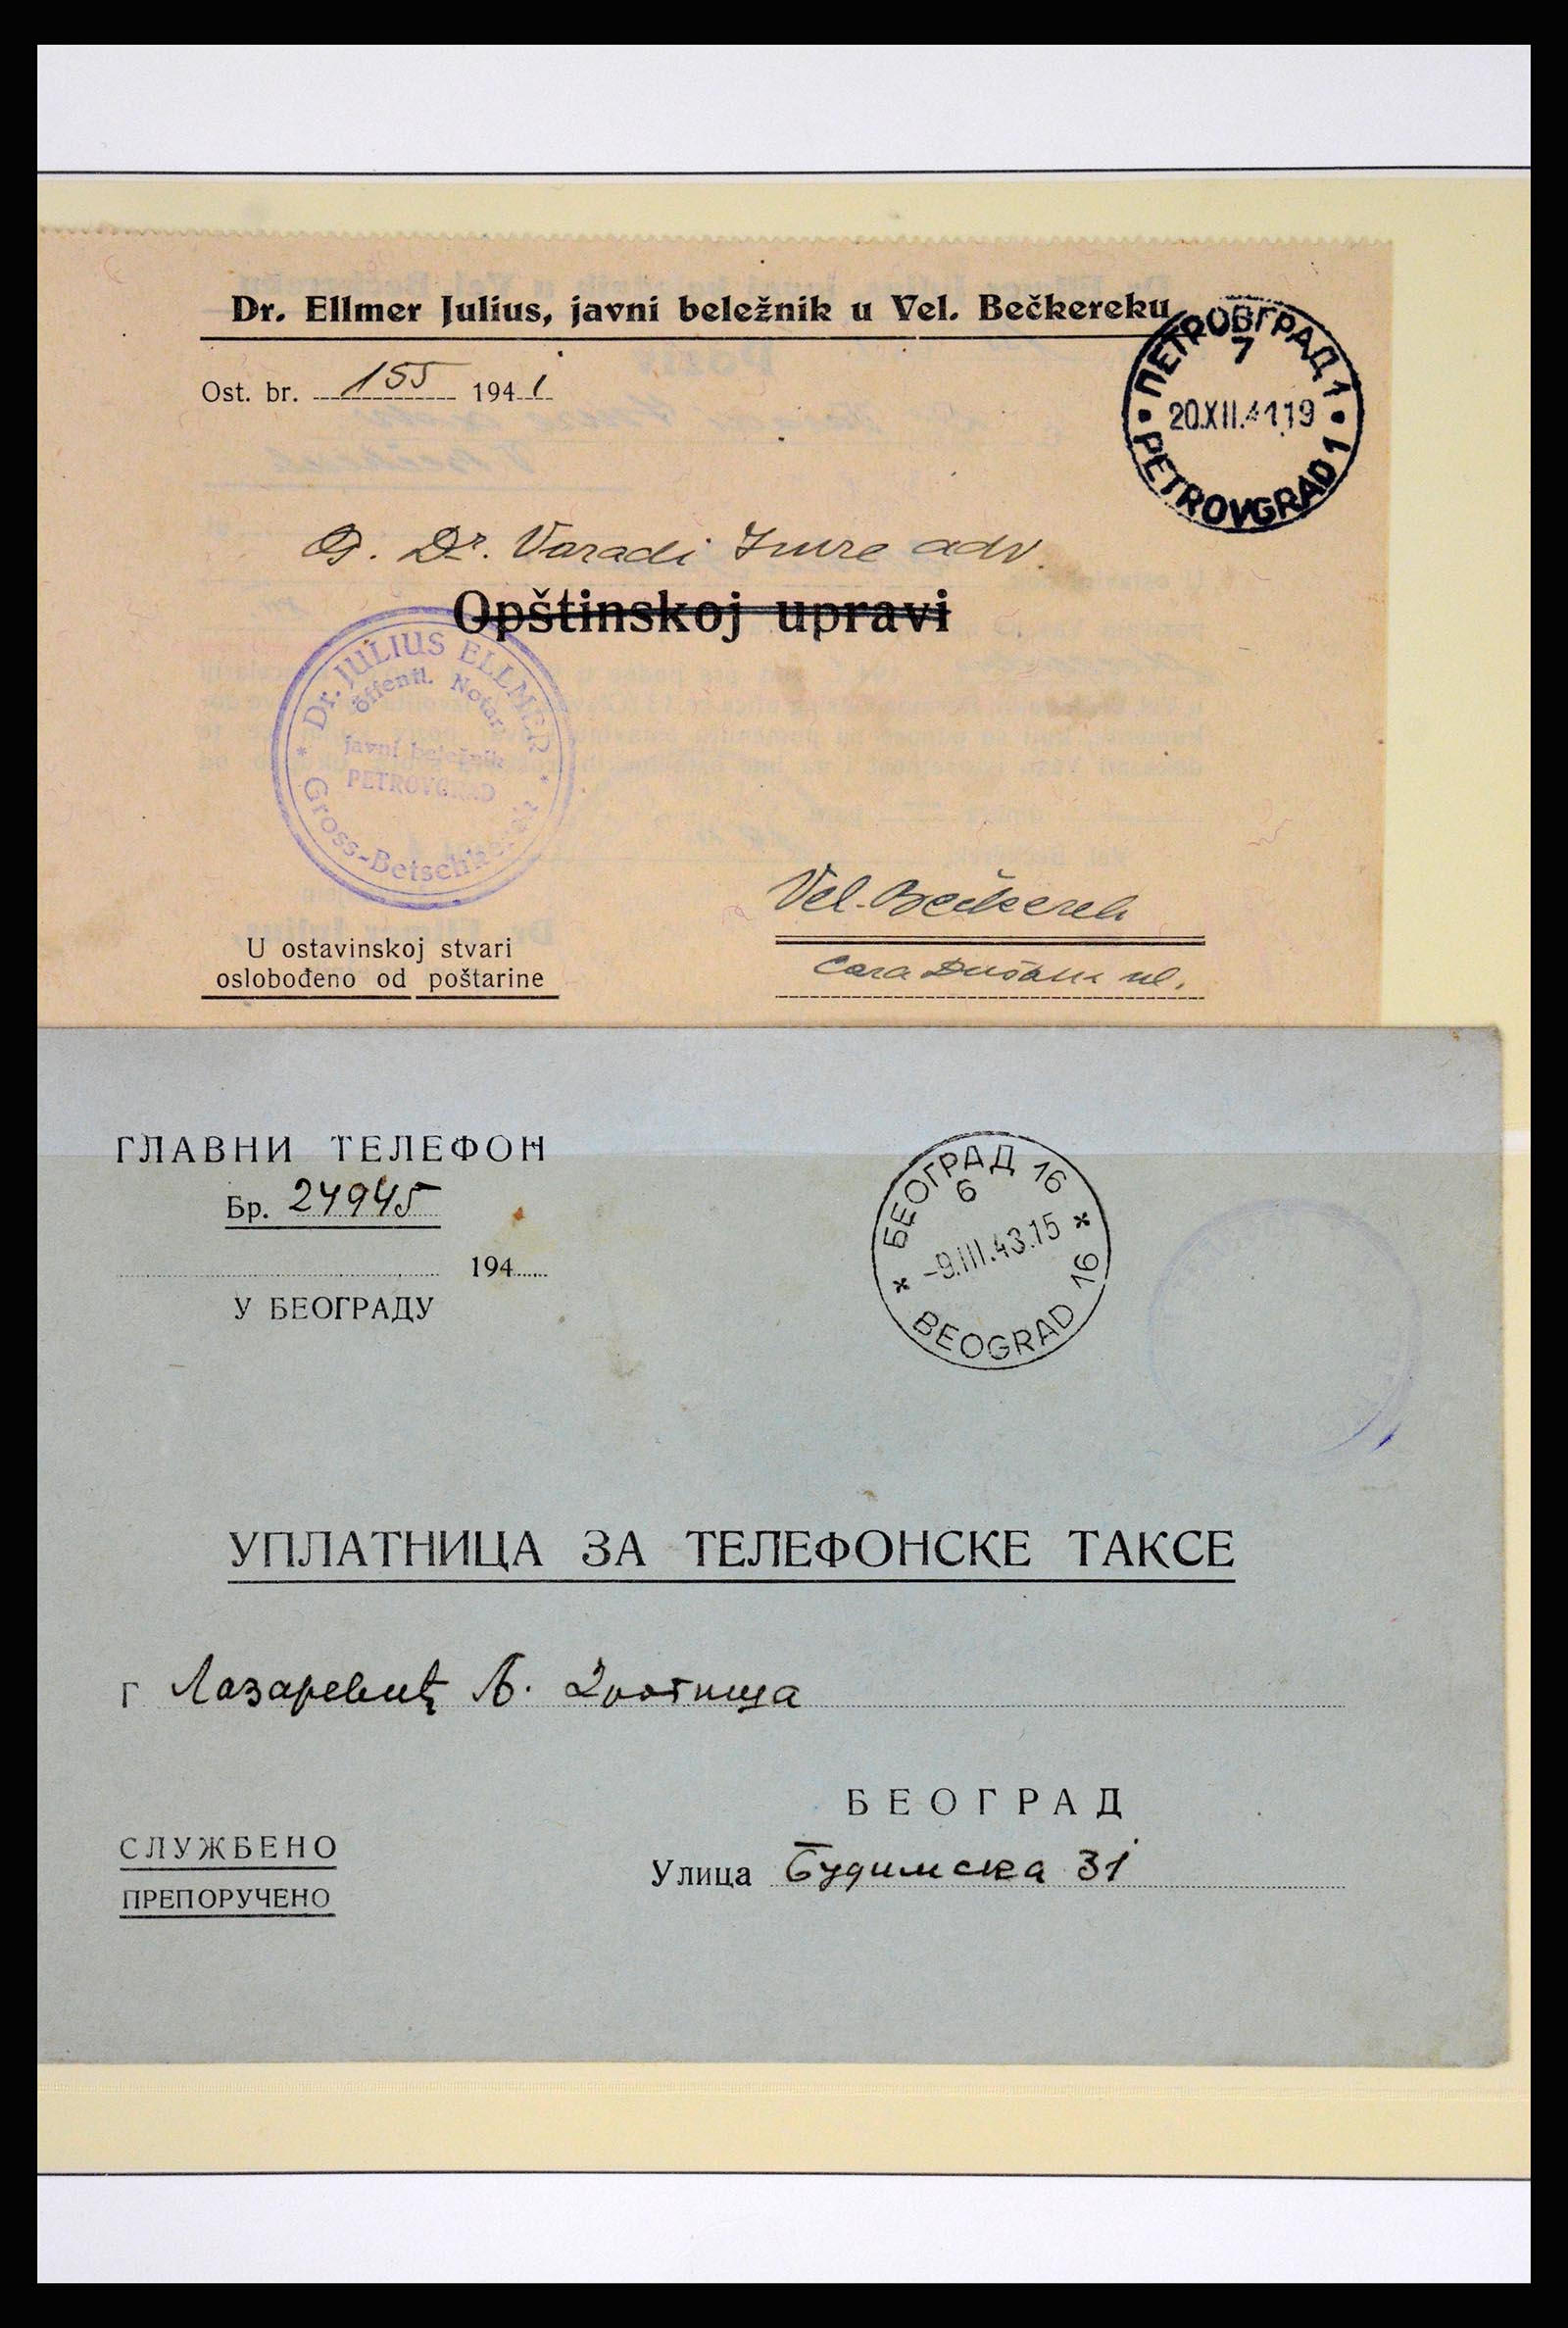 37066 050 - Stamp collection 37066 Serbia covers WW II.